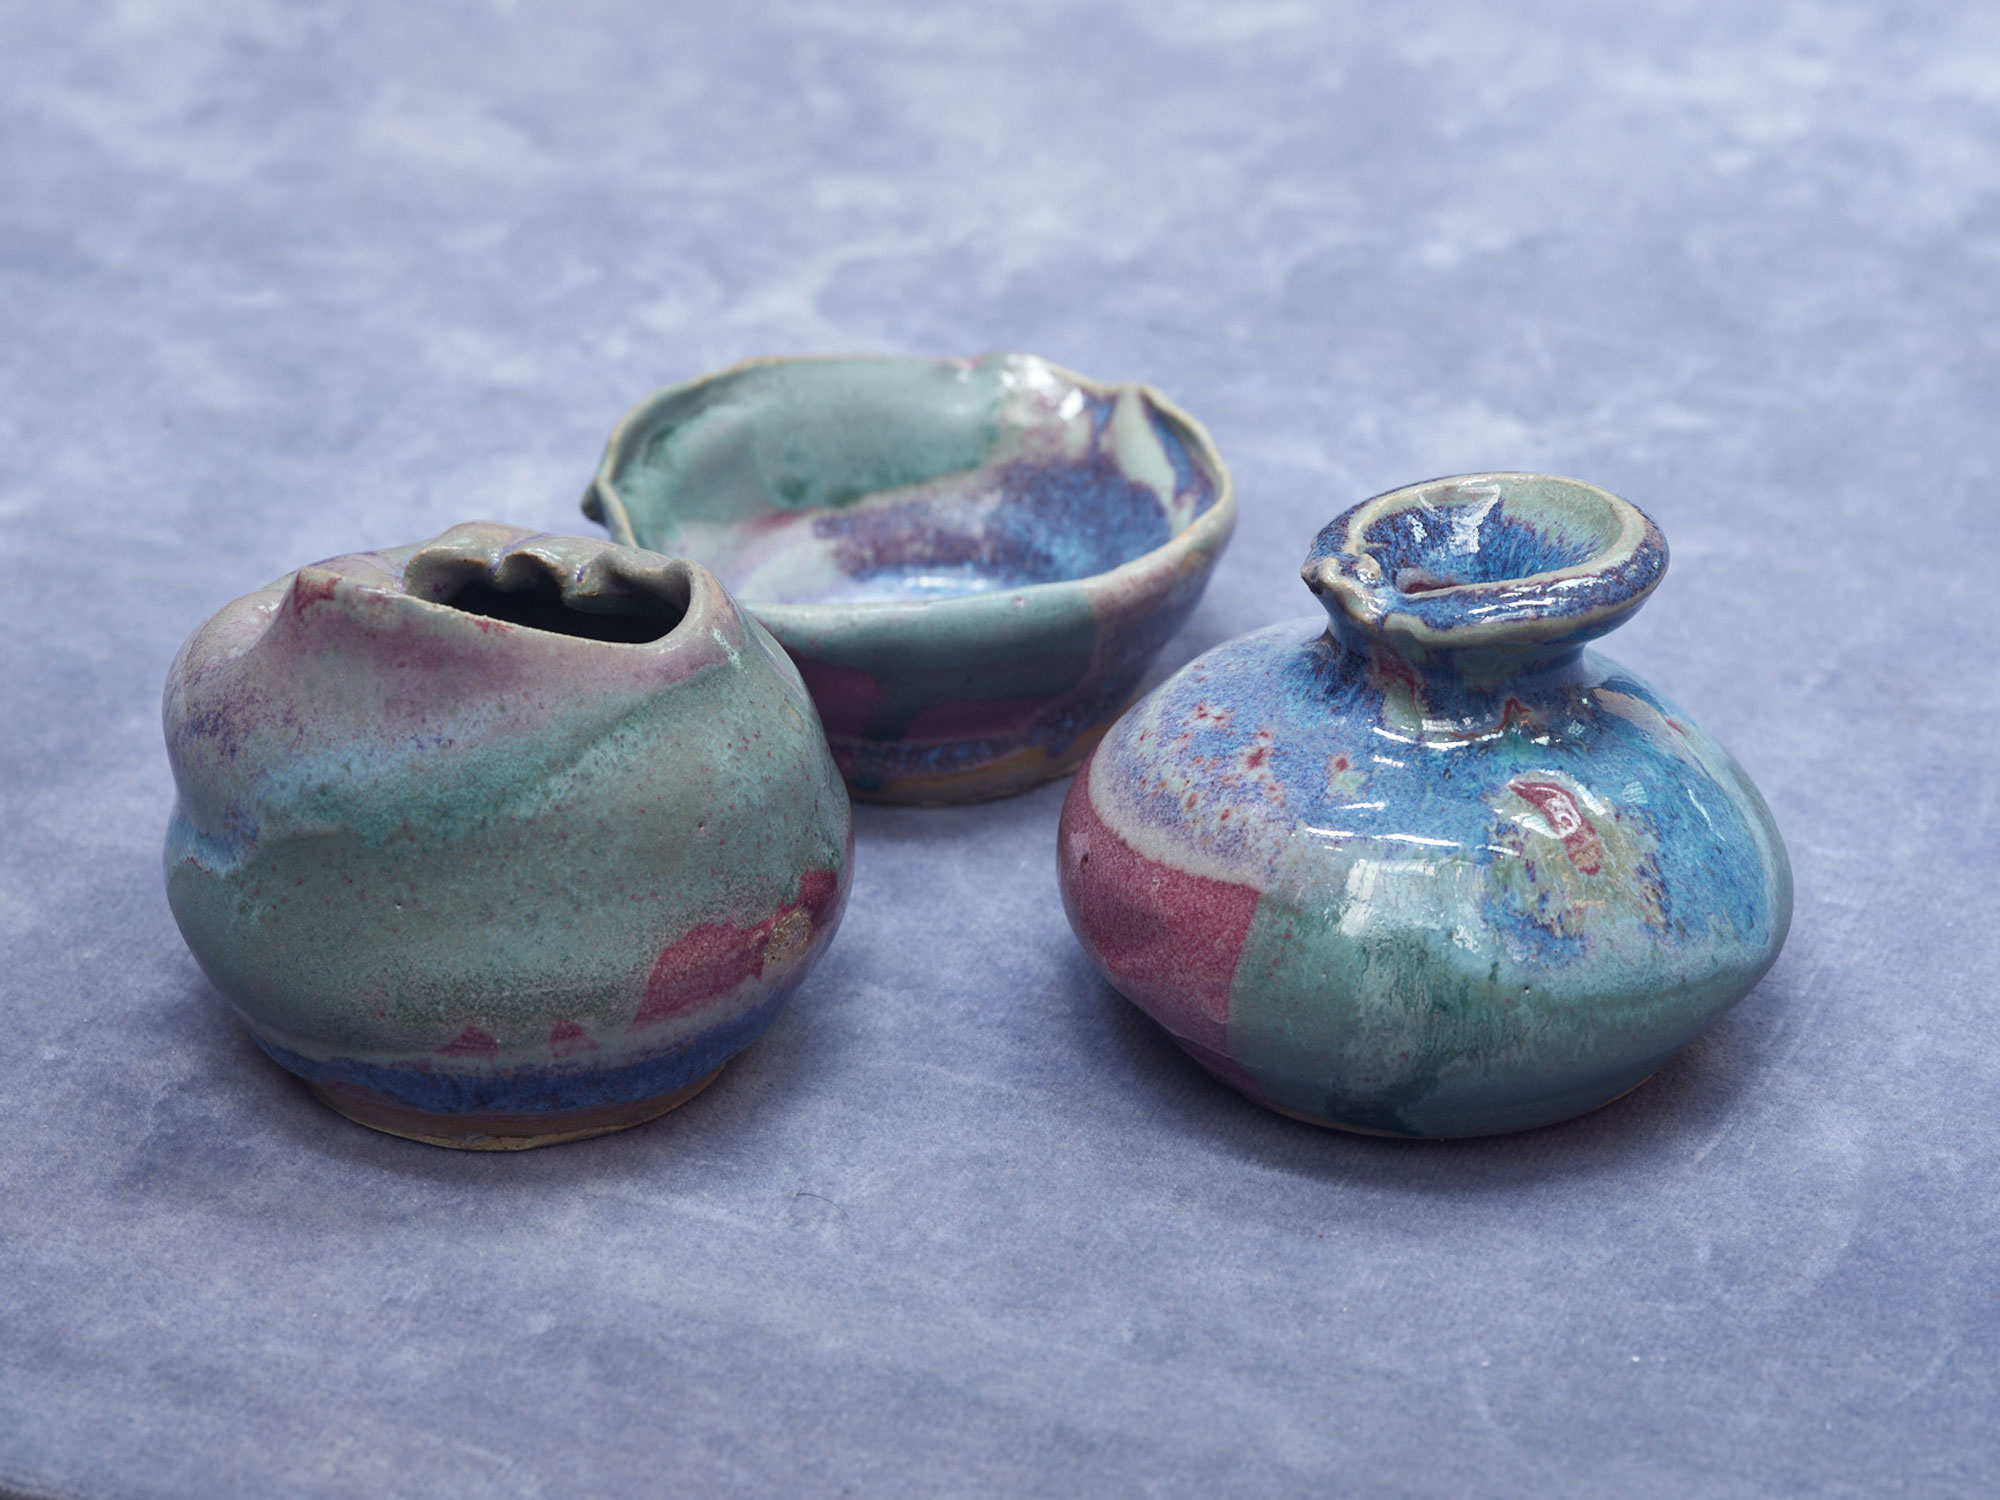 a photograph of three ceramic pots on a light blue fabric. the ceramics are odd shaped vases and are glazed in green , blue and red.